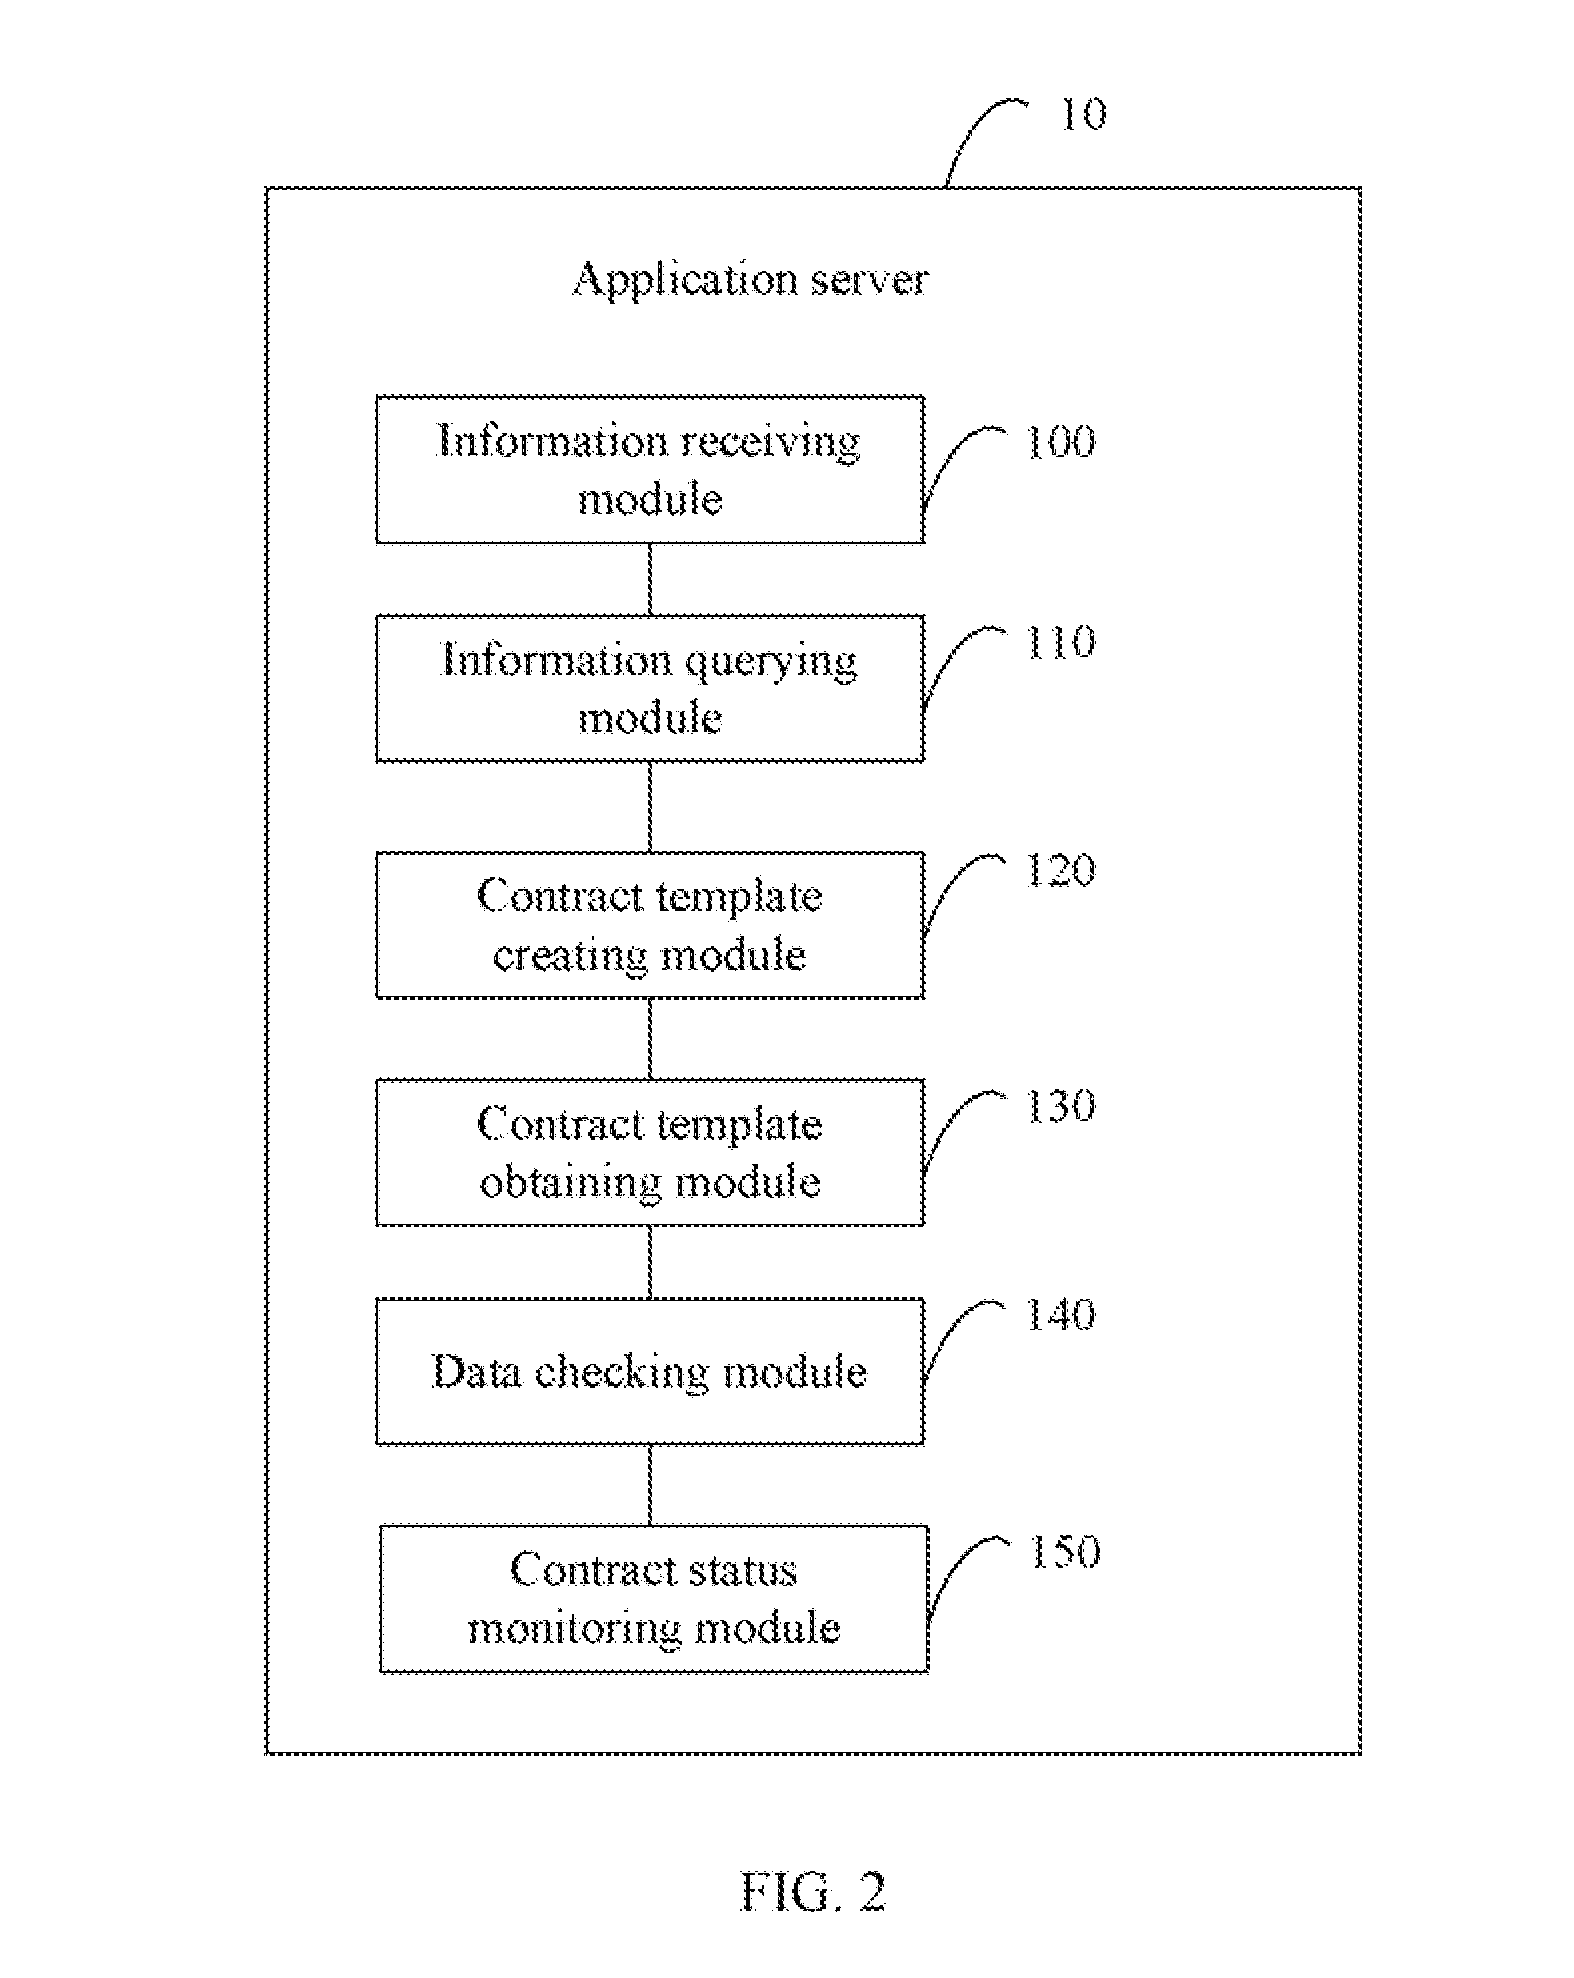 System and method for creating and managing contracts flexibly